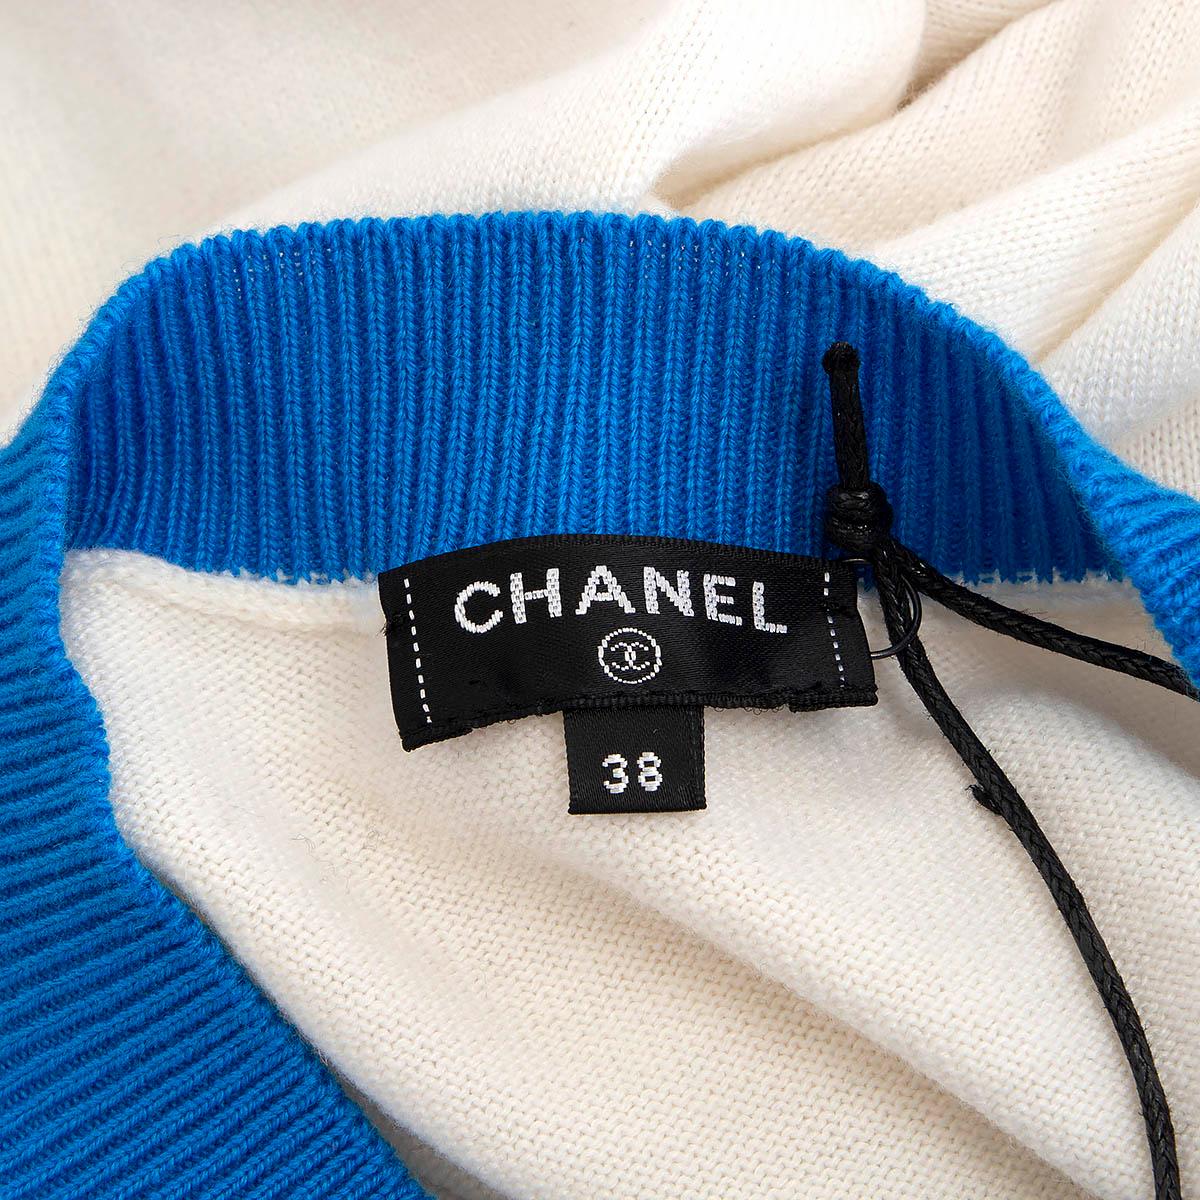 CHANEL white & blue cashmere 2019 19S ICONIC LOGO Cardigan Sweater 38 S For Sale 3